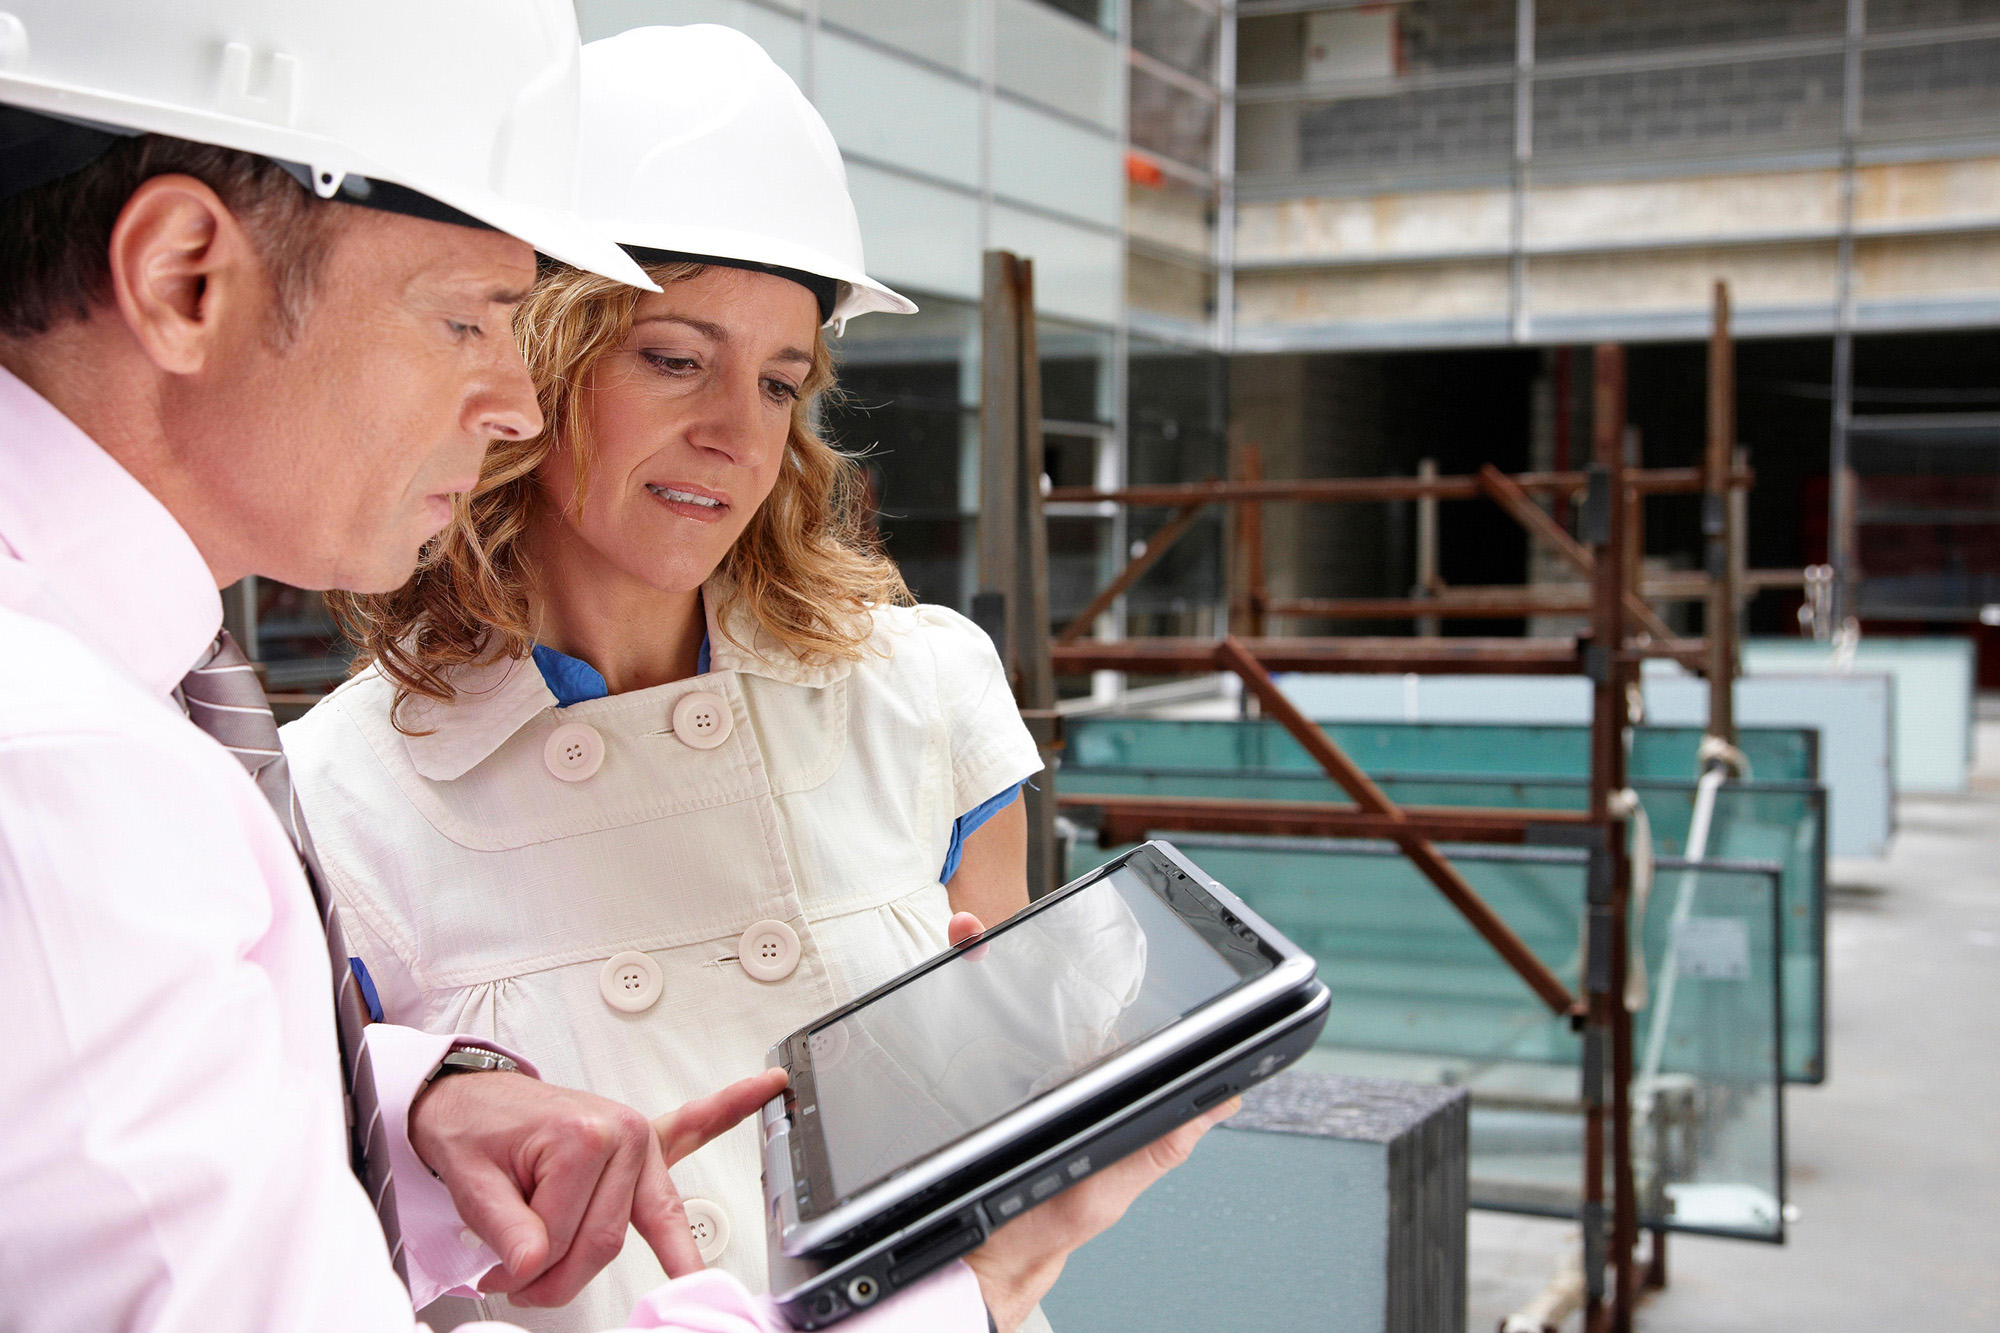 A photo shows a man and woman looking at a tablet computer. They are at a construction site and wear a hard hat.